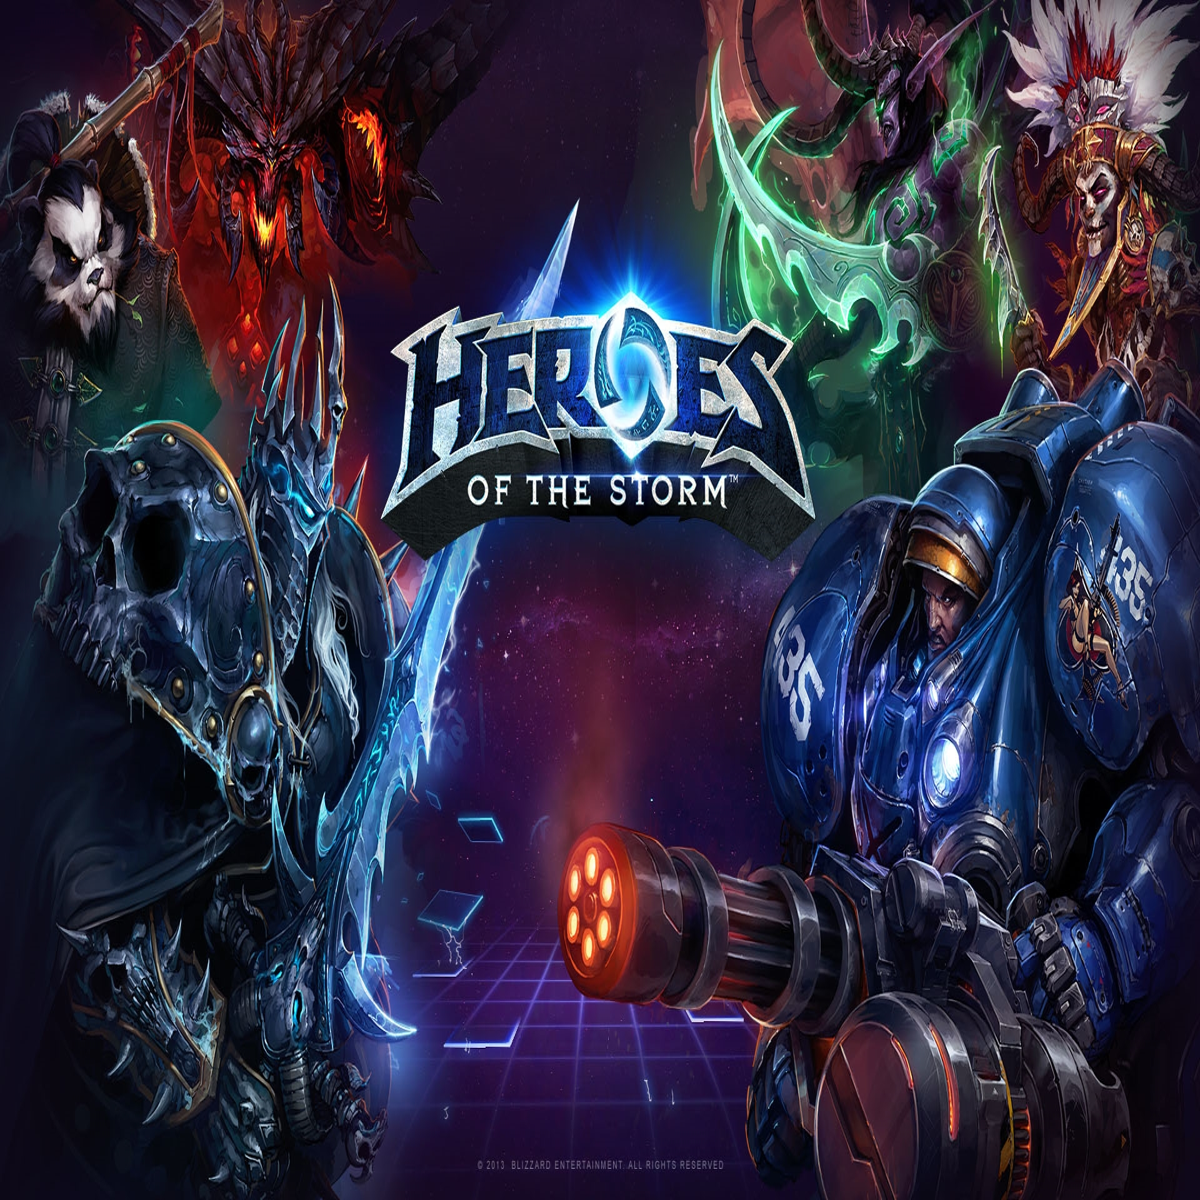 Heroes of the Storm Is No Longer Receiving New Content From Blizzard